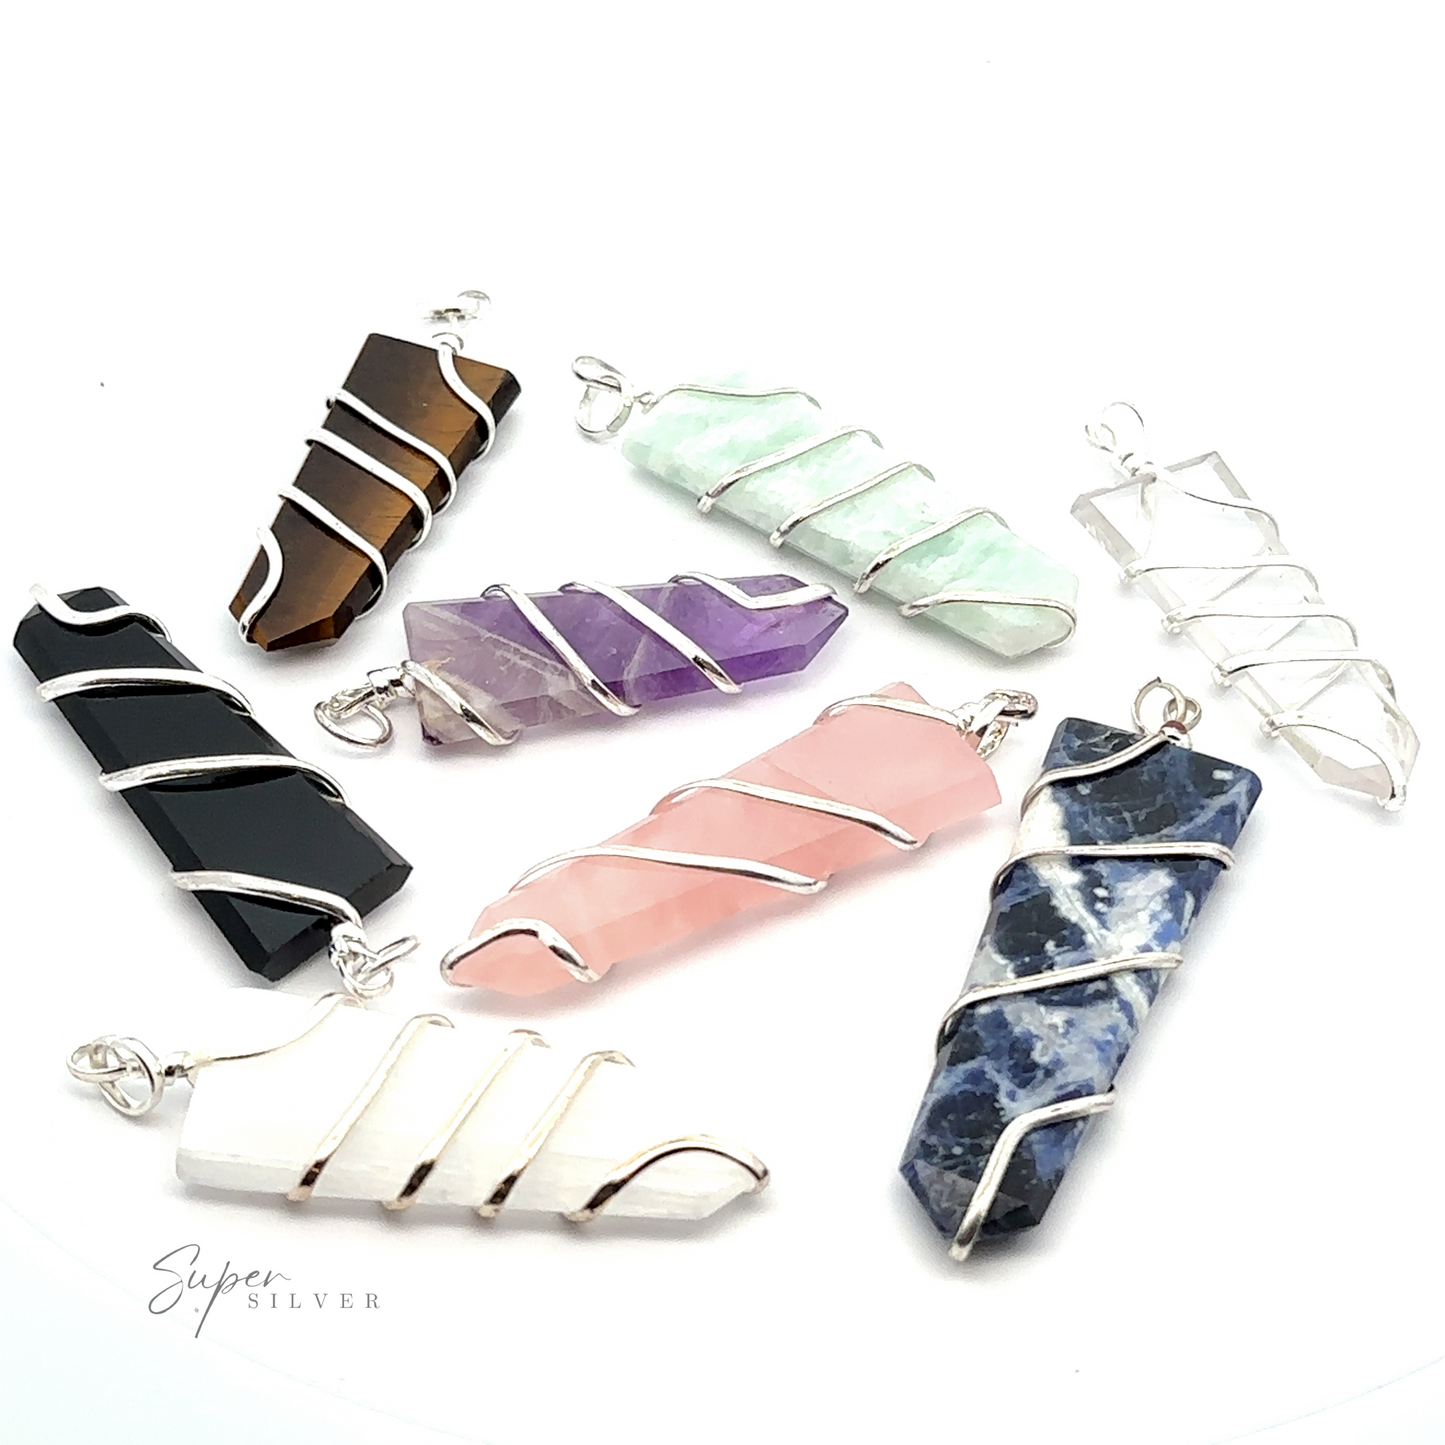 
                  
                    Seven stunning crystal pendants wrapped in silver wire are displayed on a white background. The gemstone jewelry varies in color, including black, brown, white, green, purple, pink, and blue. Each Wire Wrapped Slab Pendant showcases the natural beauty of its unique stone slab pendant.
                  
                